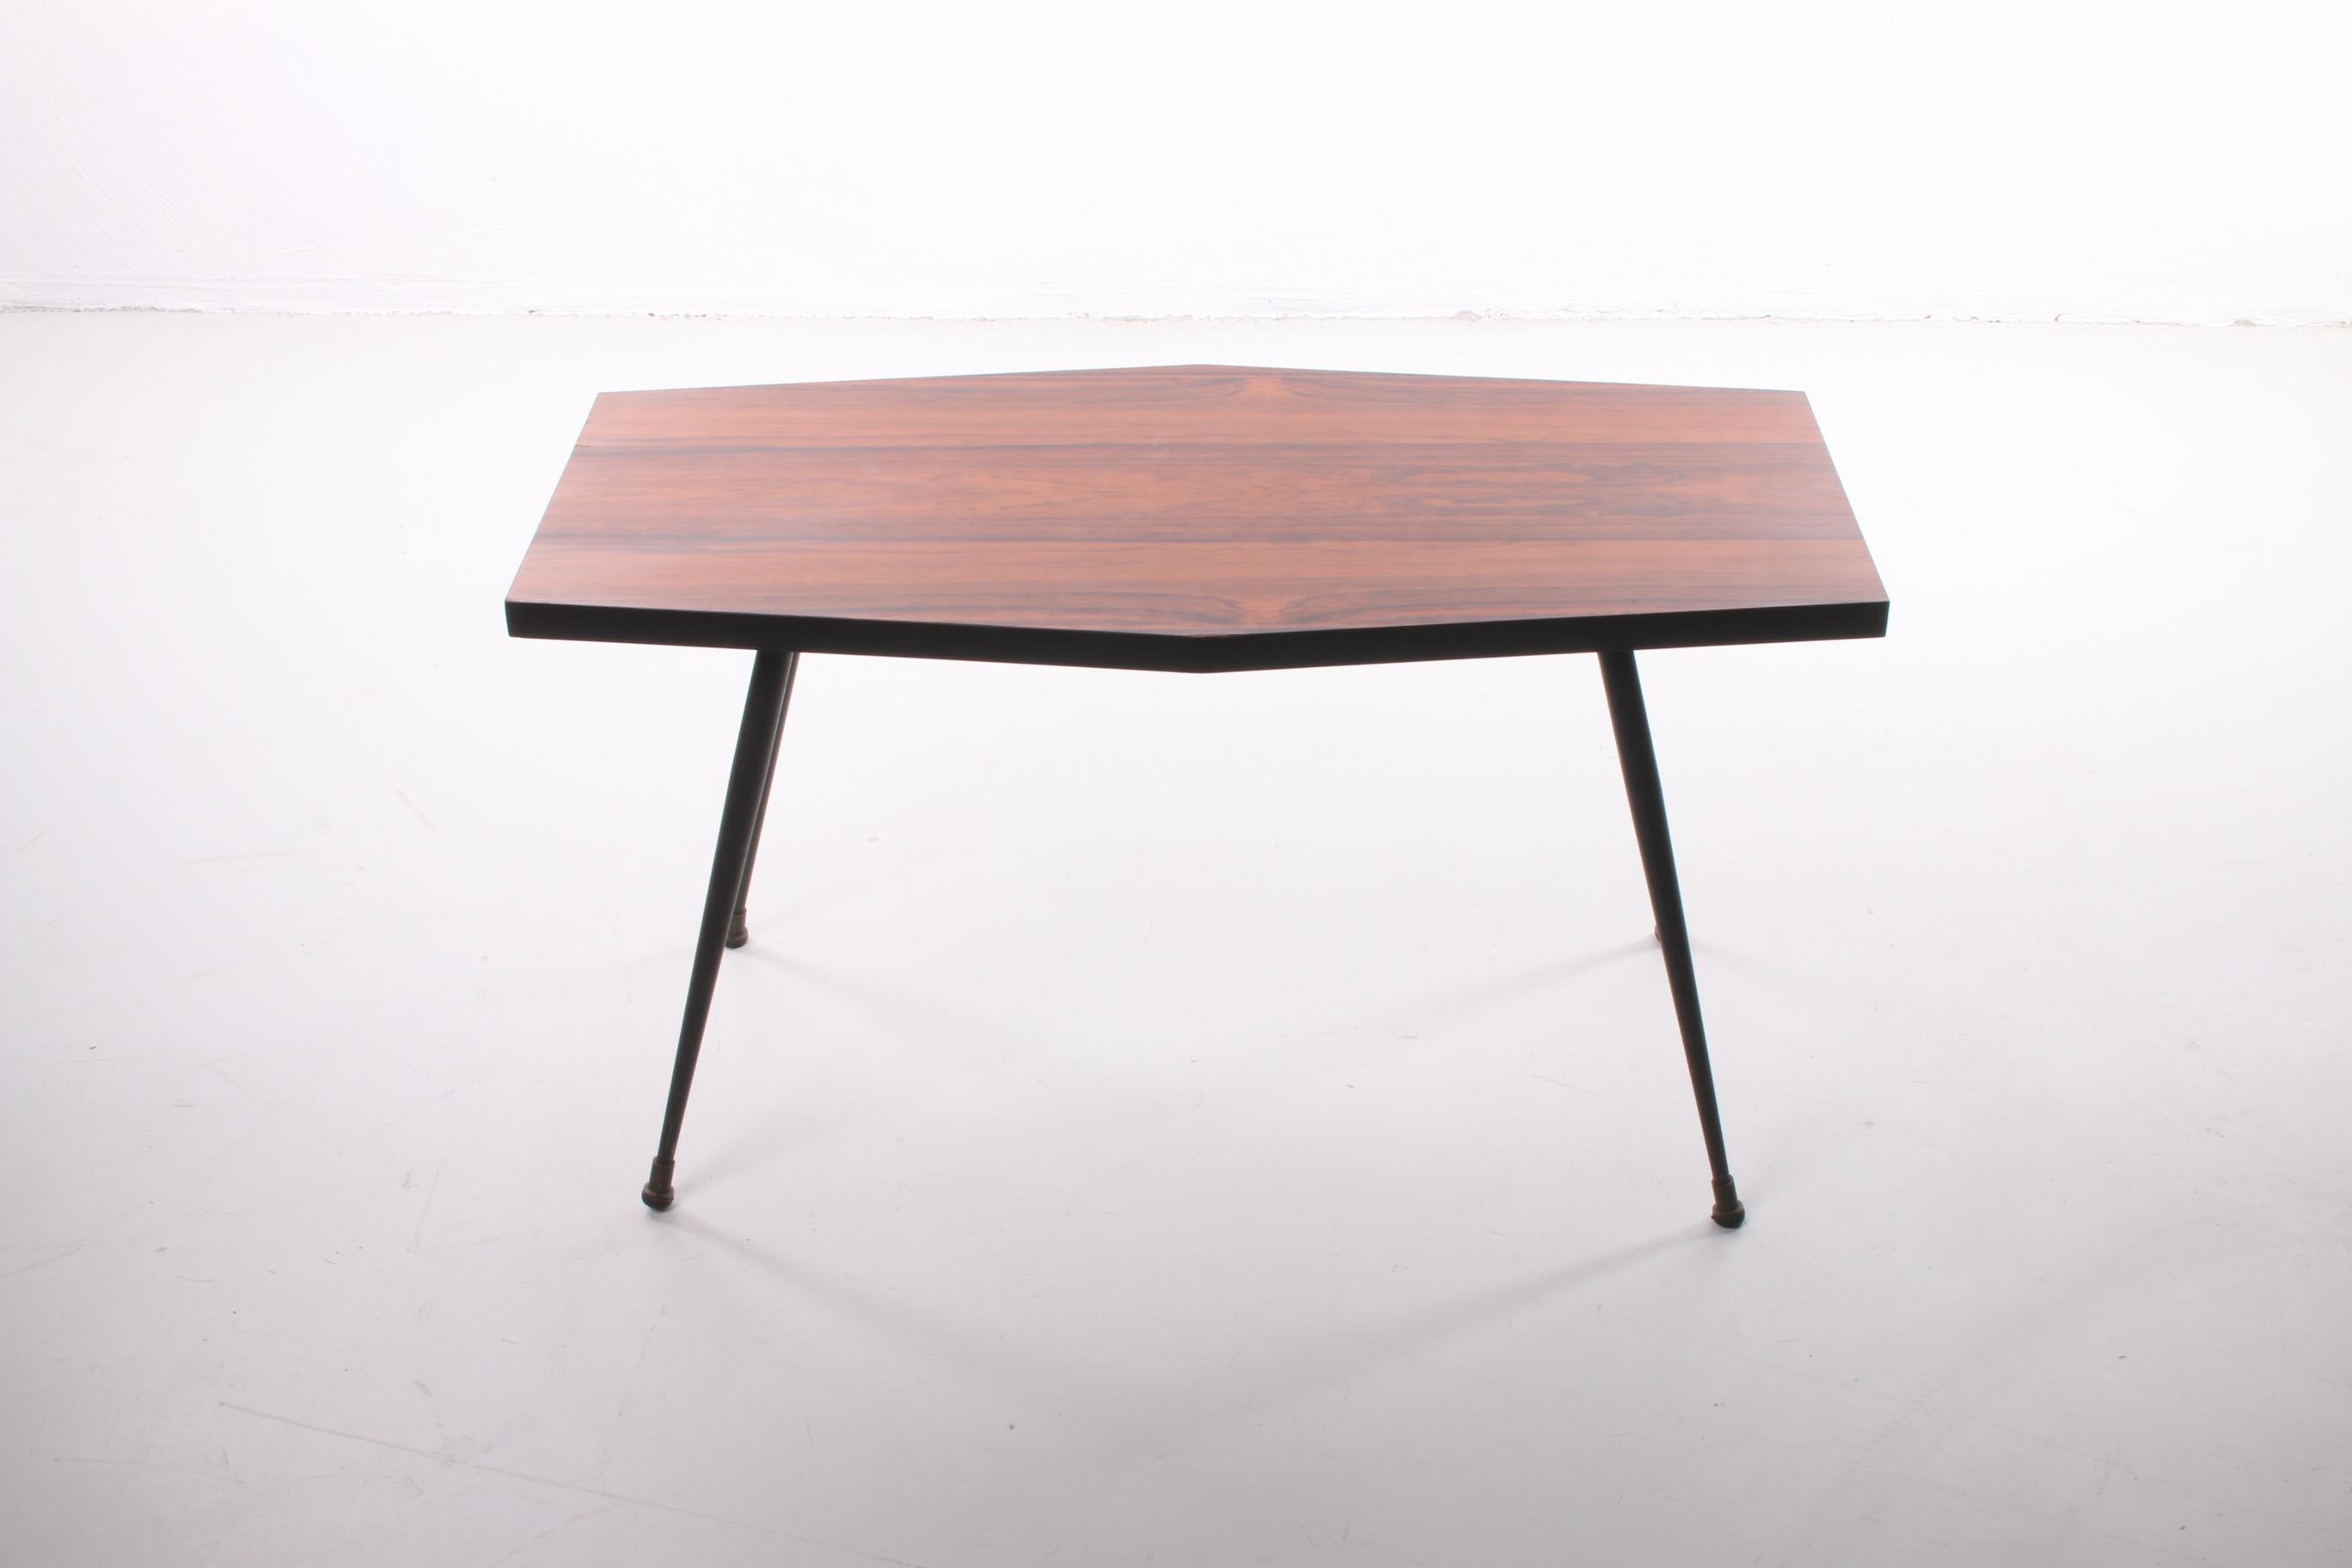 A beautiful table that can either be used as a plant table or side table from the 1970s.

Made of  veneered wood with very elegant metal black legs. The wood gives the table top a beautiful warm color.

The table comes from Germany and is still in